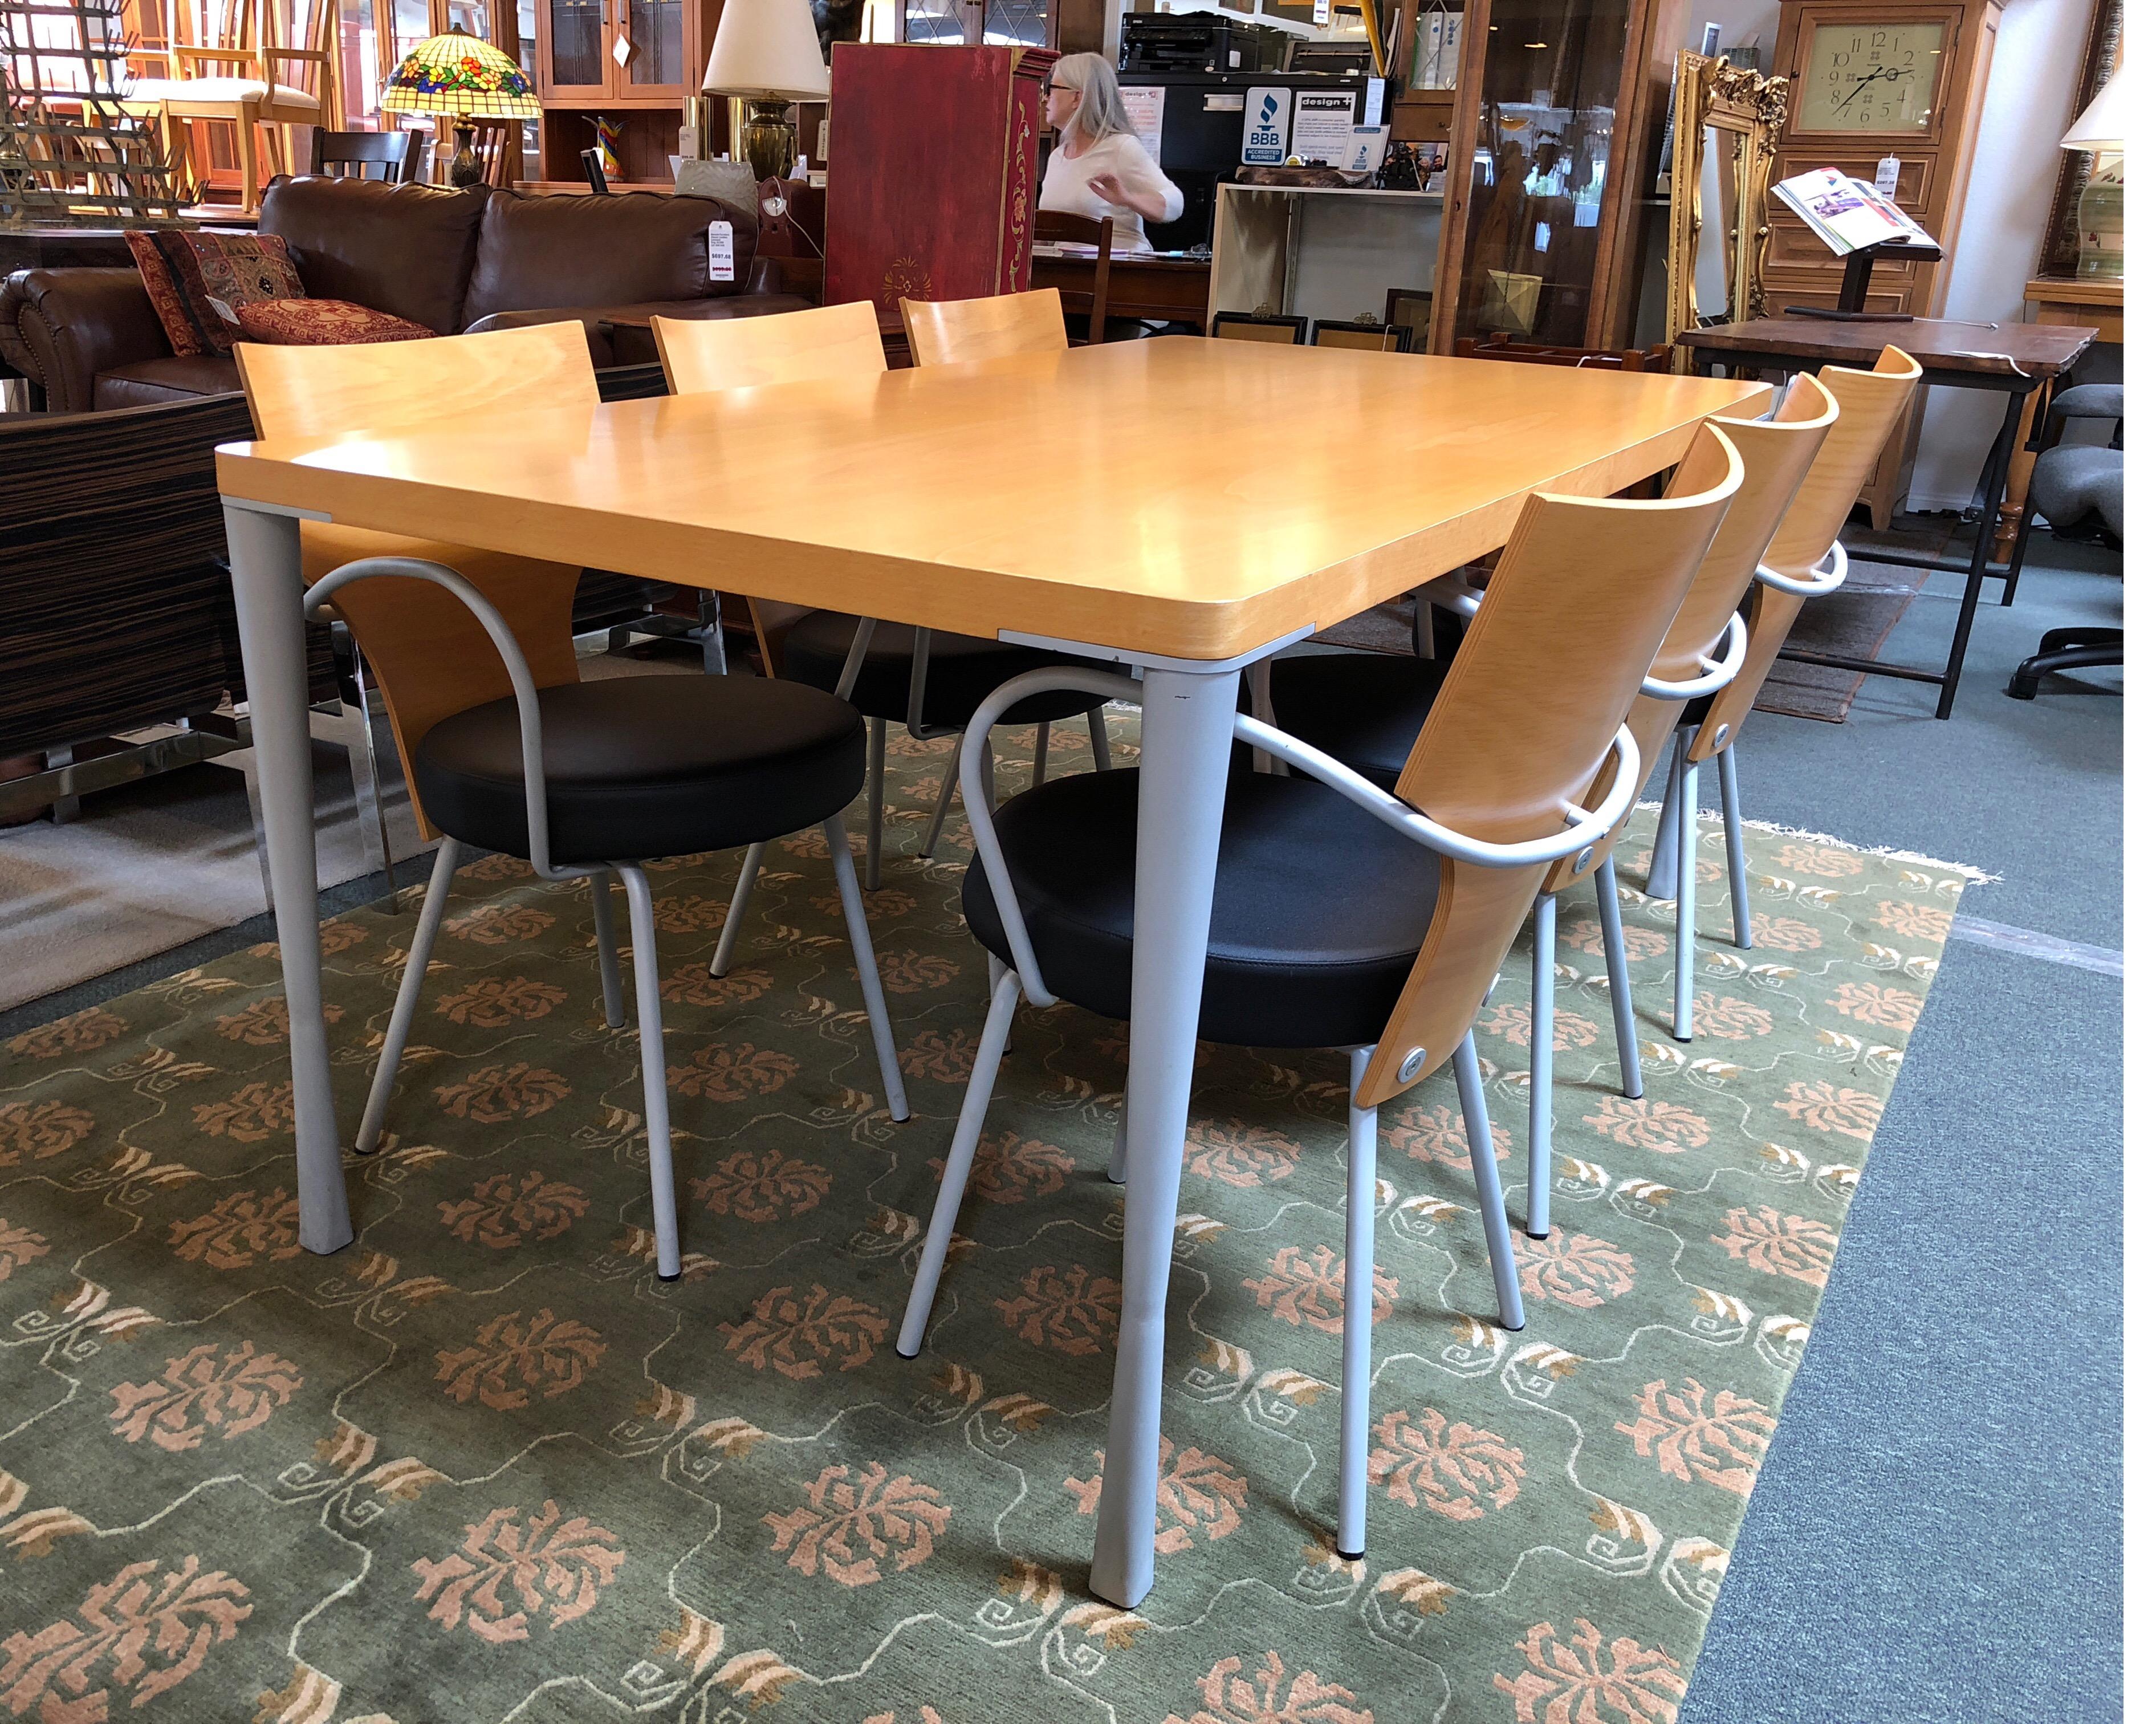 A vintage fly line dining set, made in Italy. Timeless contemporary styling, the birch, steel and leather set offers dining for up to eight. Powder-coat finish on sculptural table legs and chair frame makes durability a feature. Natural birch wood